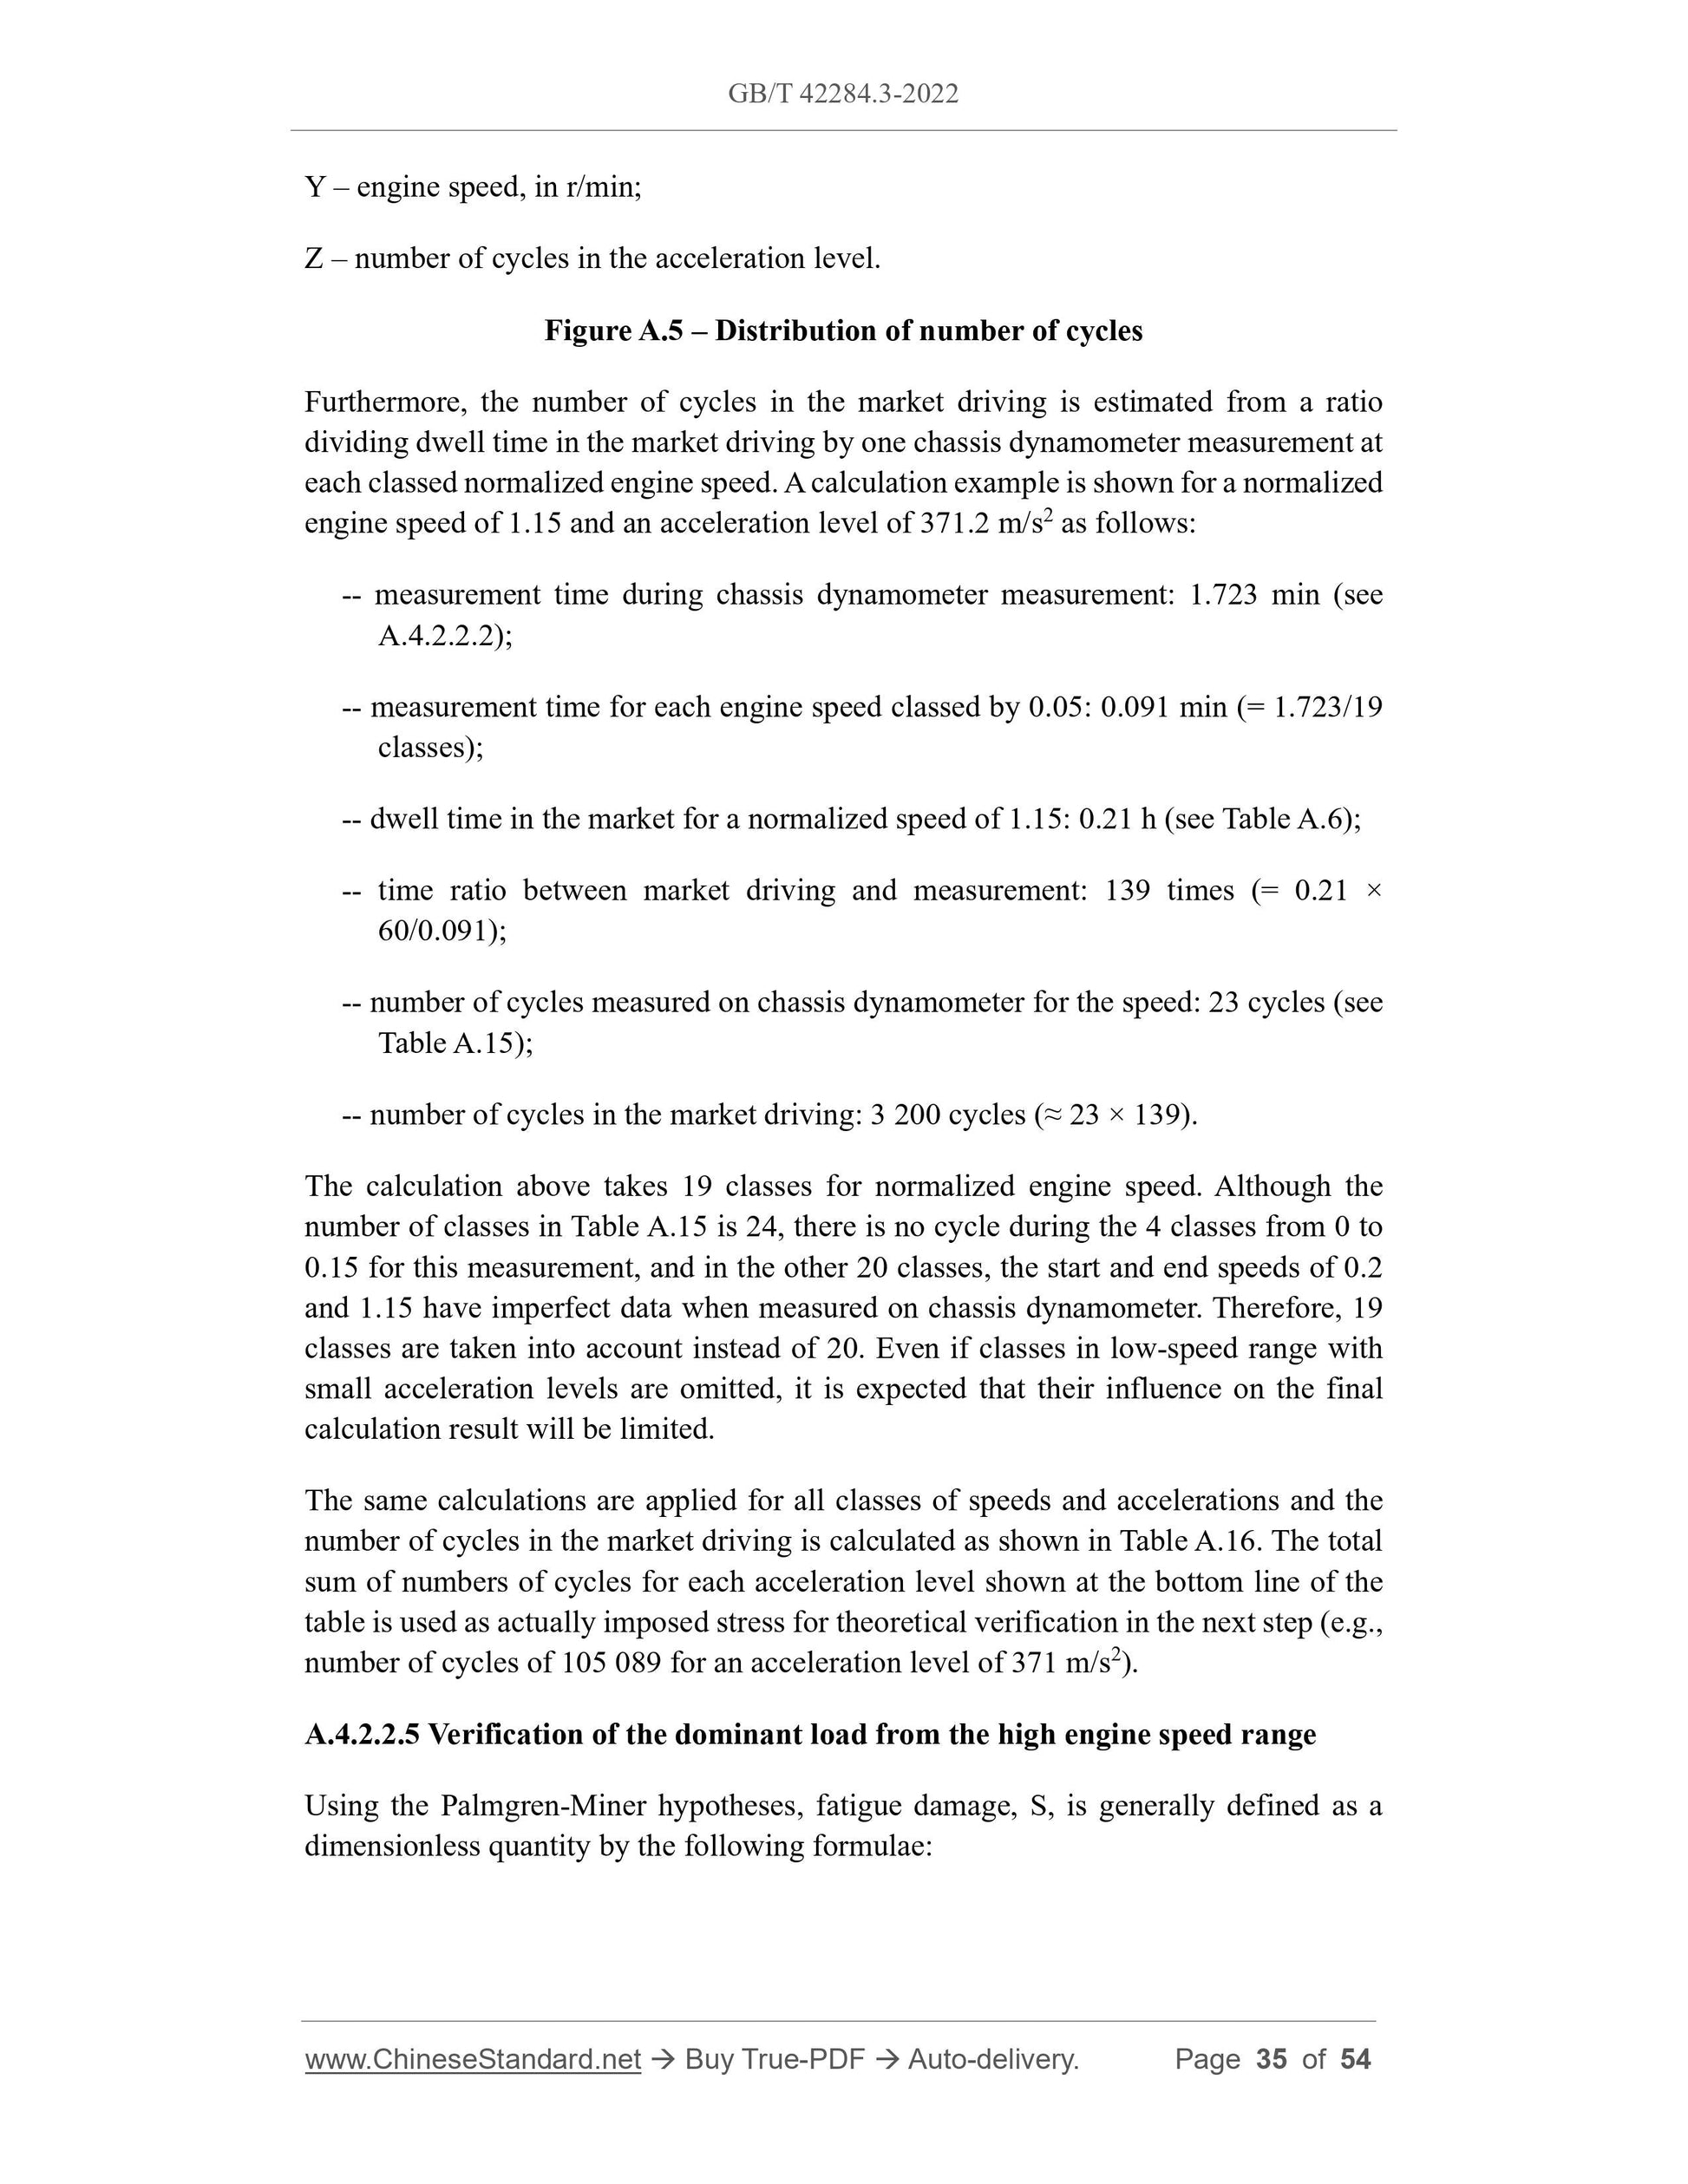 GB/T 42284.3-2022 Page 6